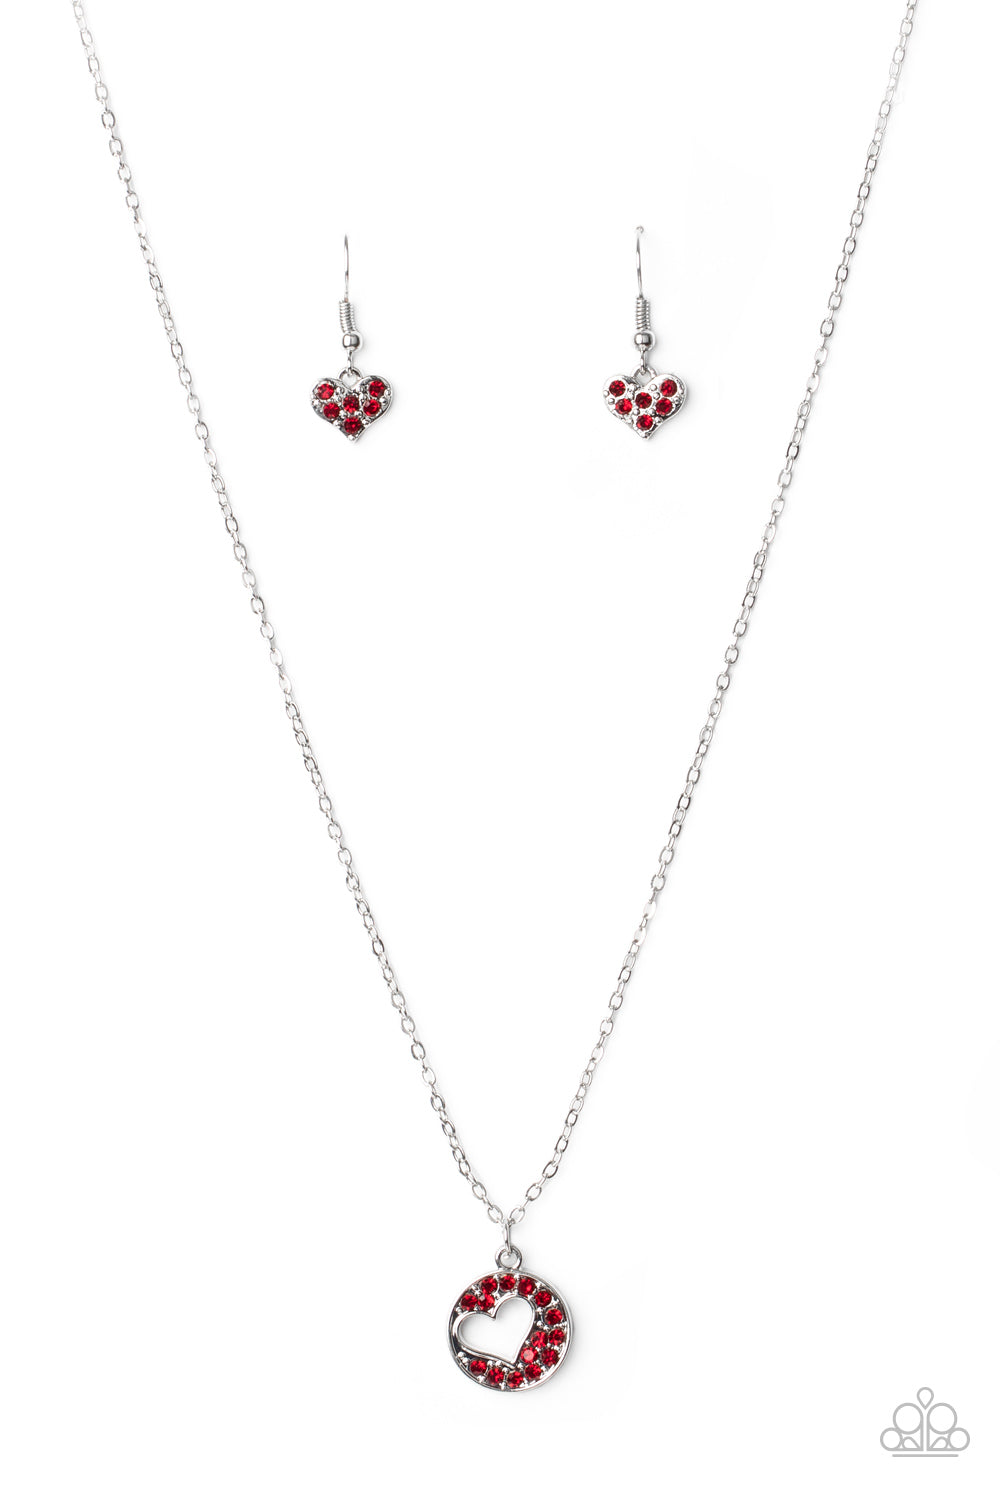 Paparazzi Necklaces - Bare Your Heart - Red